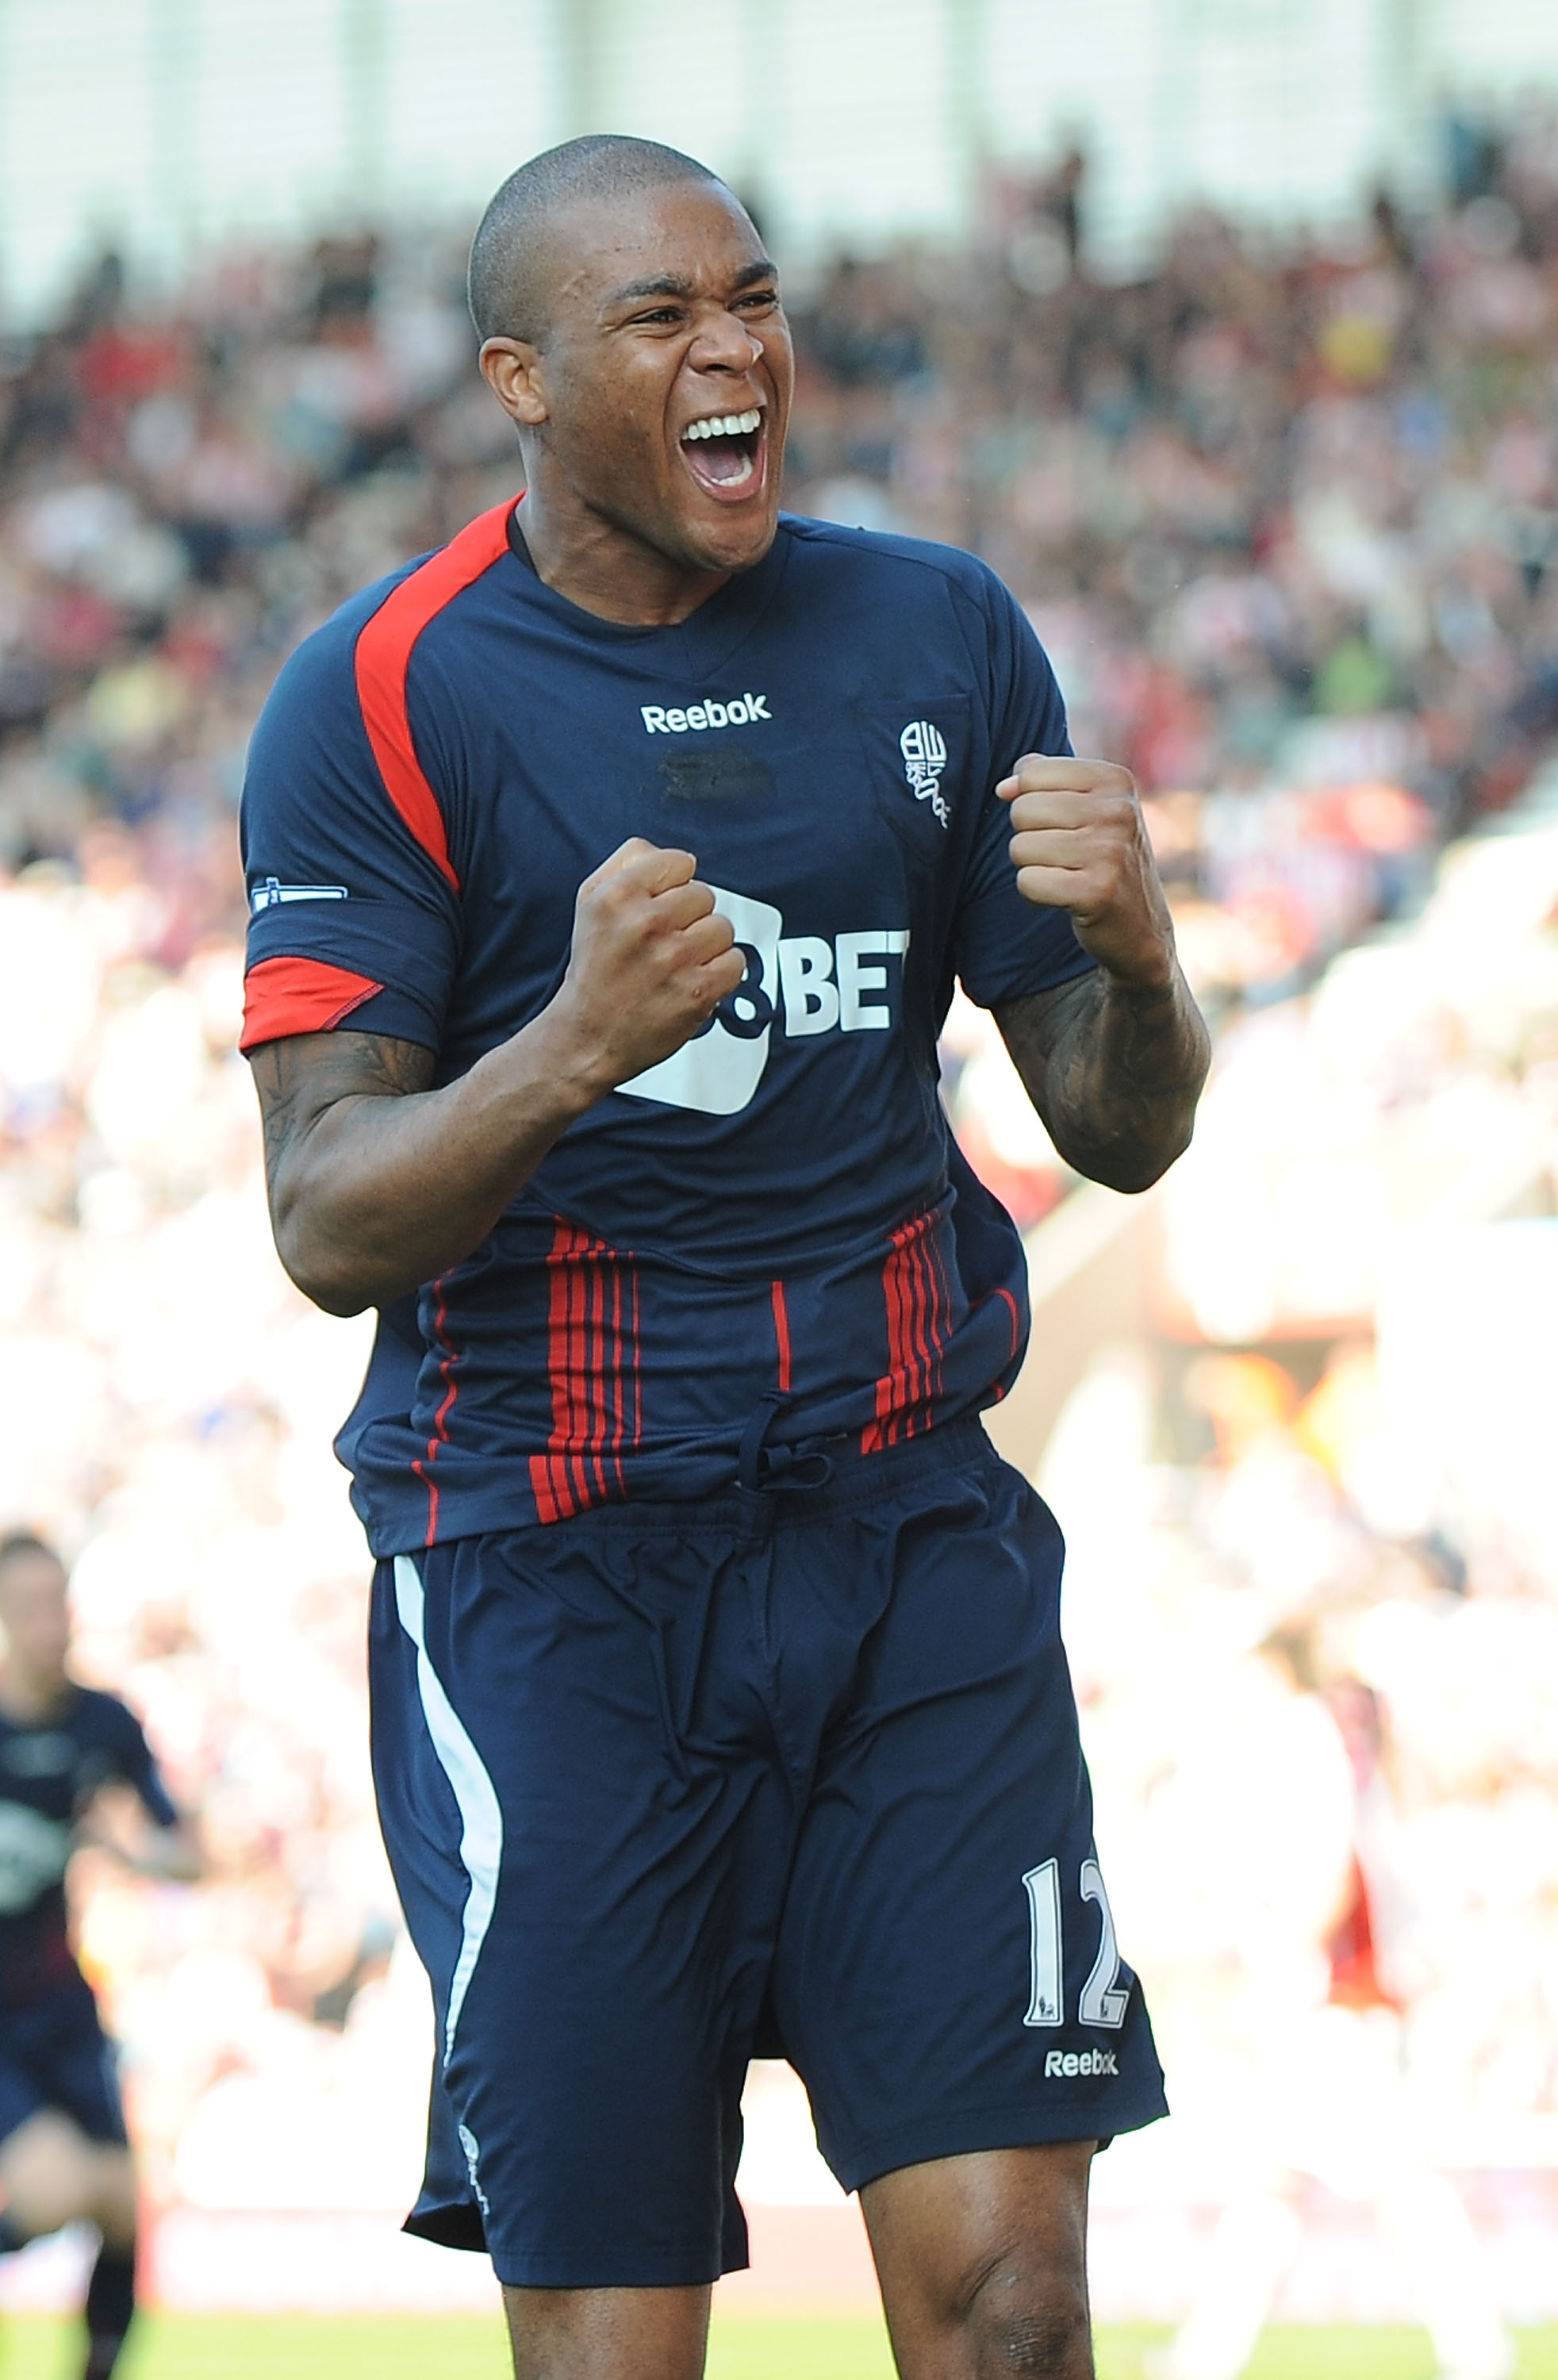 STOKE ON TRENT, ENGLAND - APRIL 17:  Zat Knight of Bolton celebrates their first goal during the Barclays Premier League match between Stoke City and Bolton Wanderers at the Britannia Stadium on April 17, 2010 in Stoke on Trent, England.  (Photo by Christ